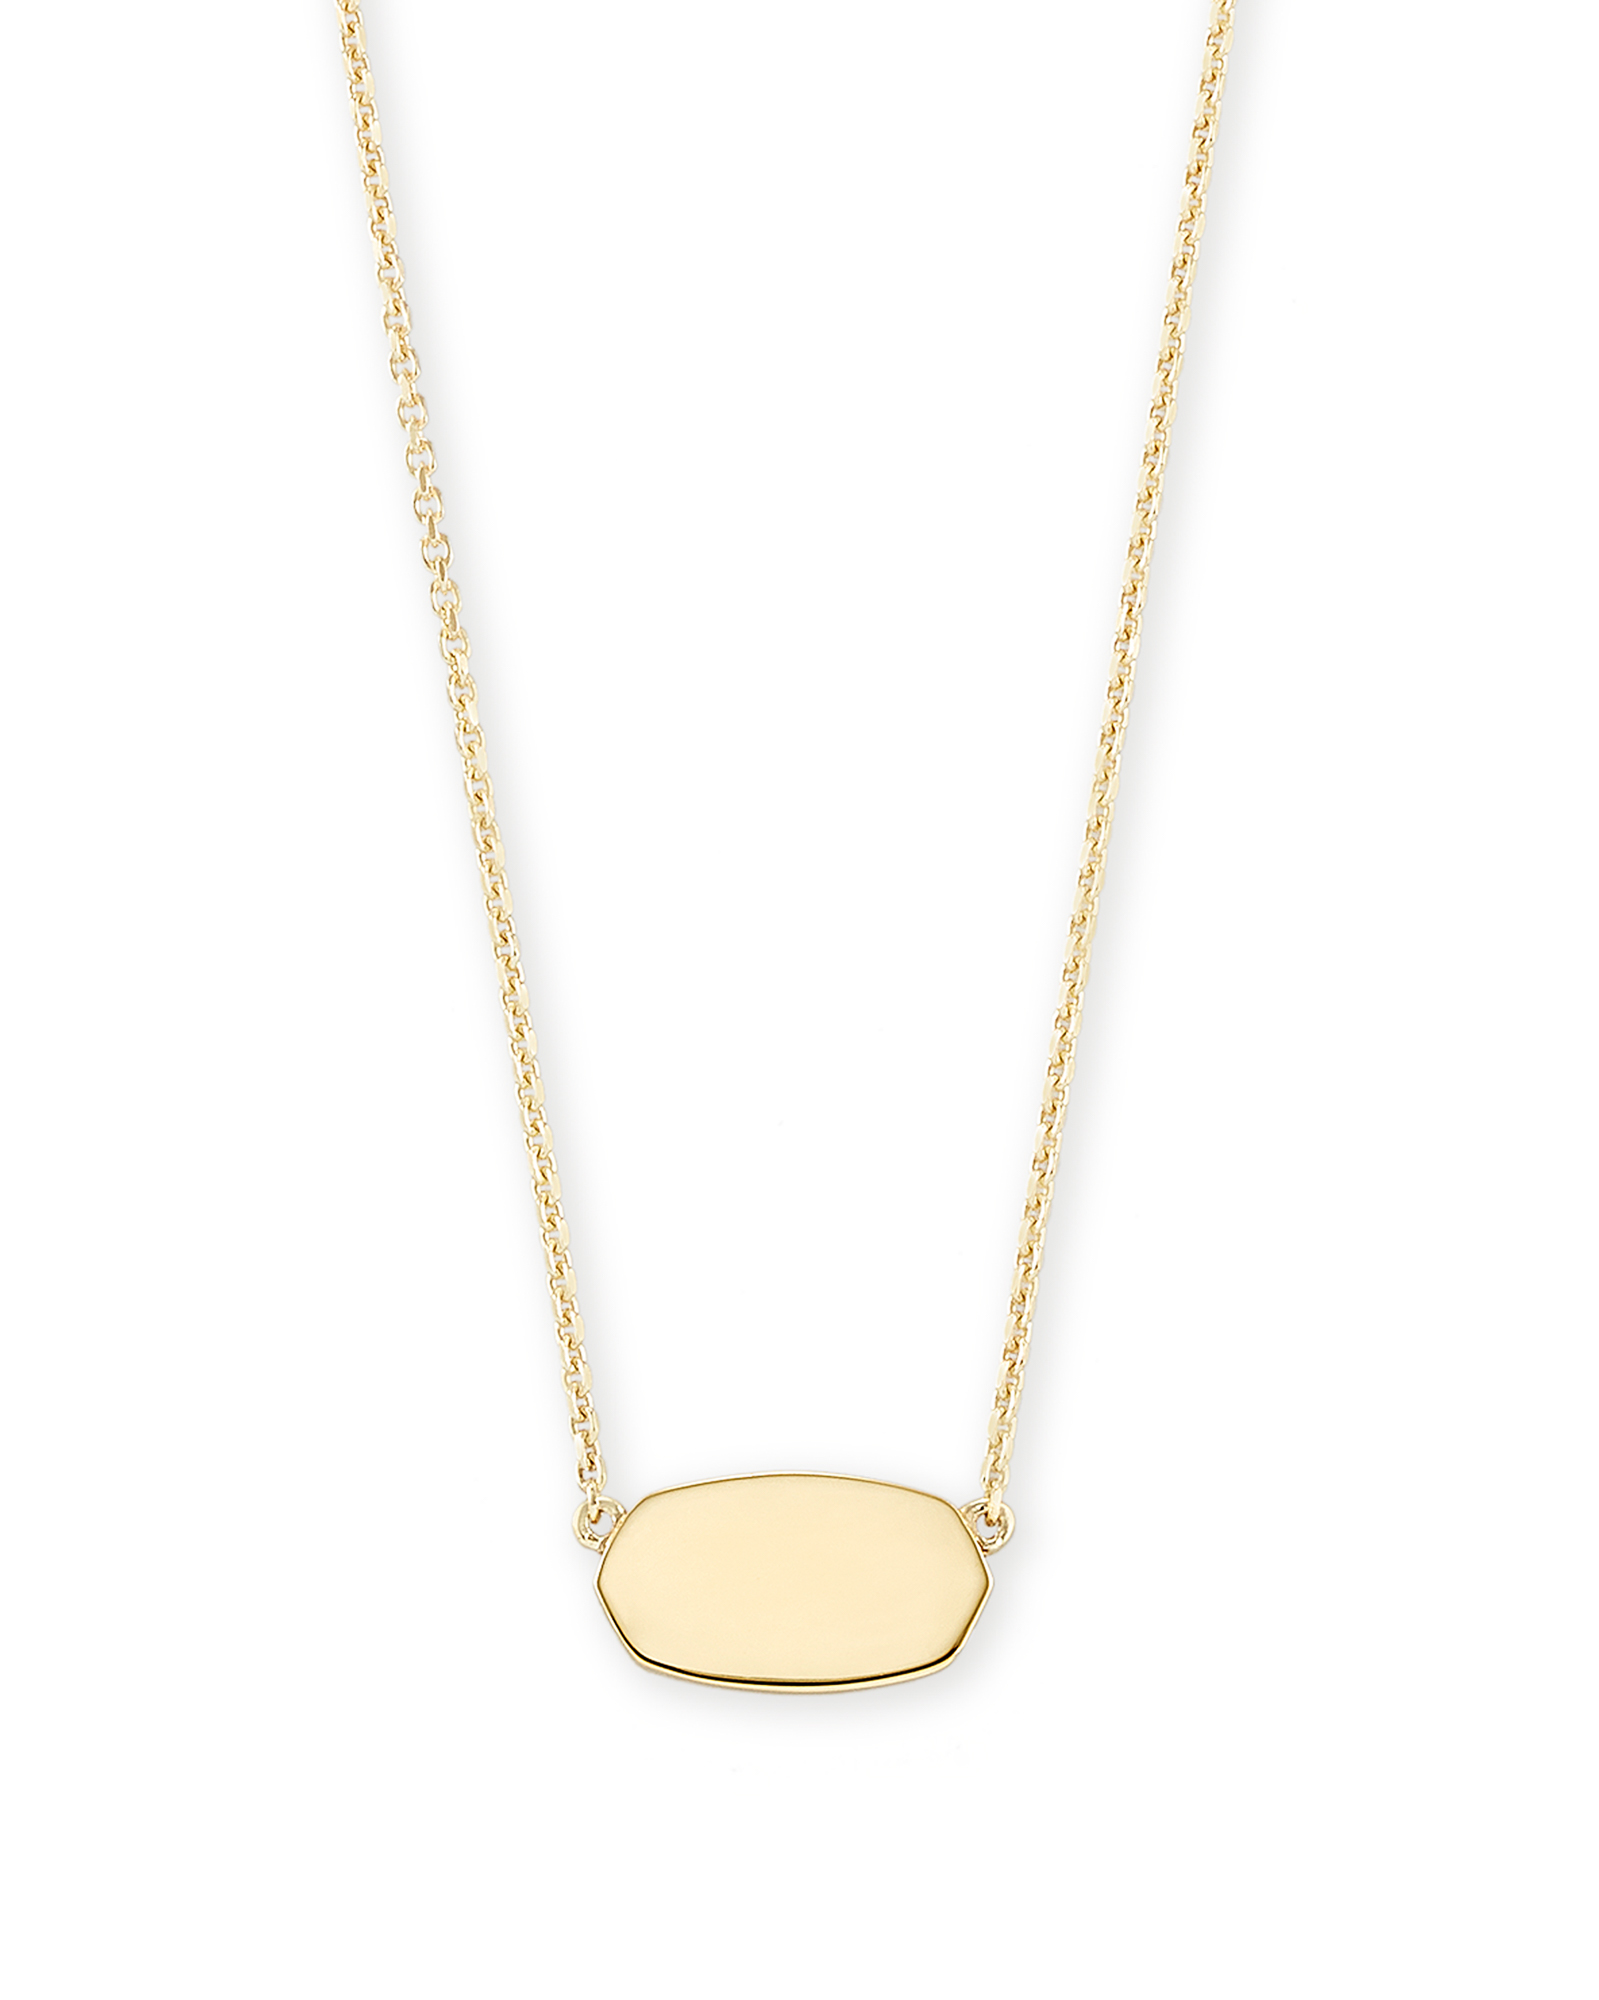 GABBY STRAND NECKLACE BY KENDRA SCOTT – Two Eighty Seven